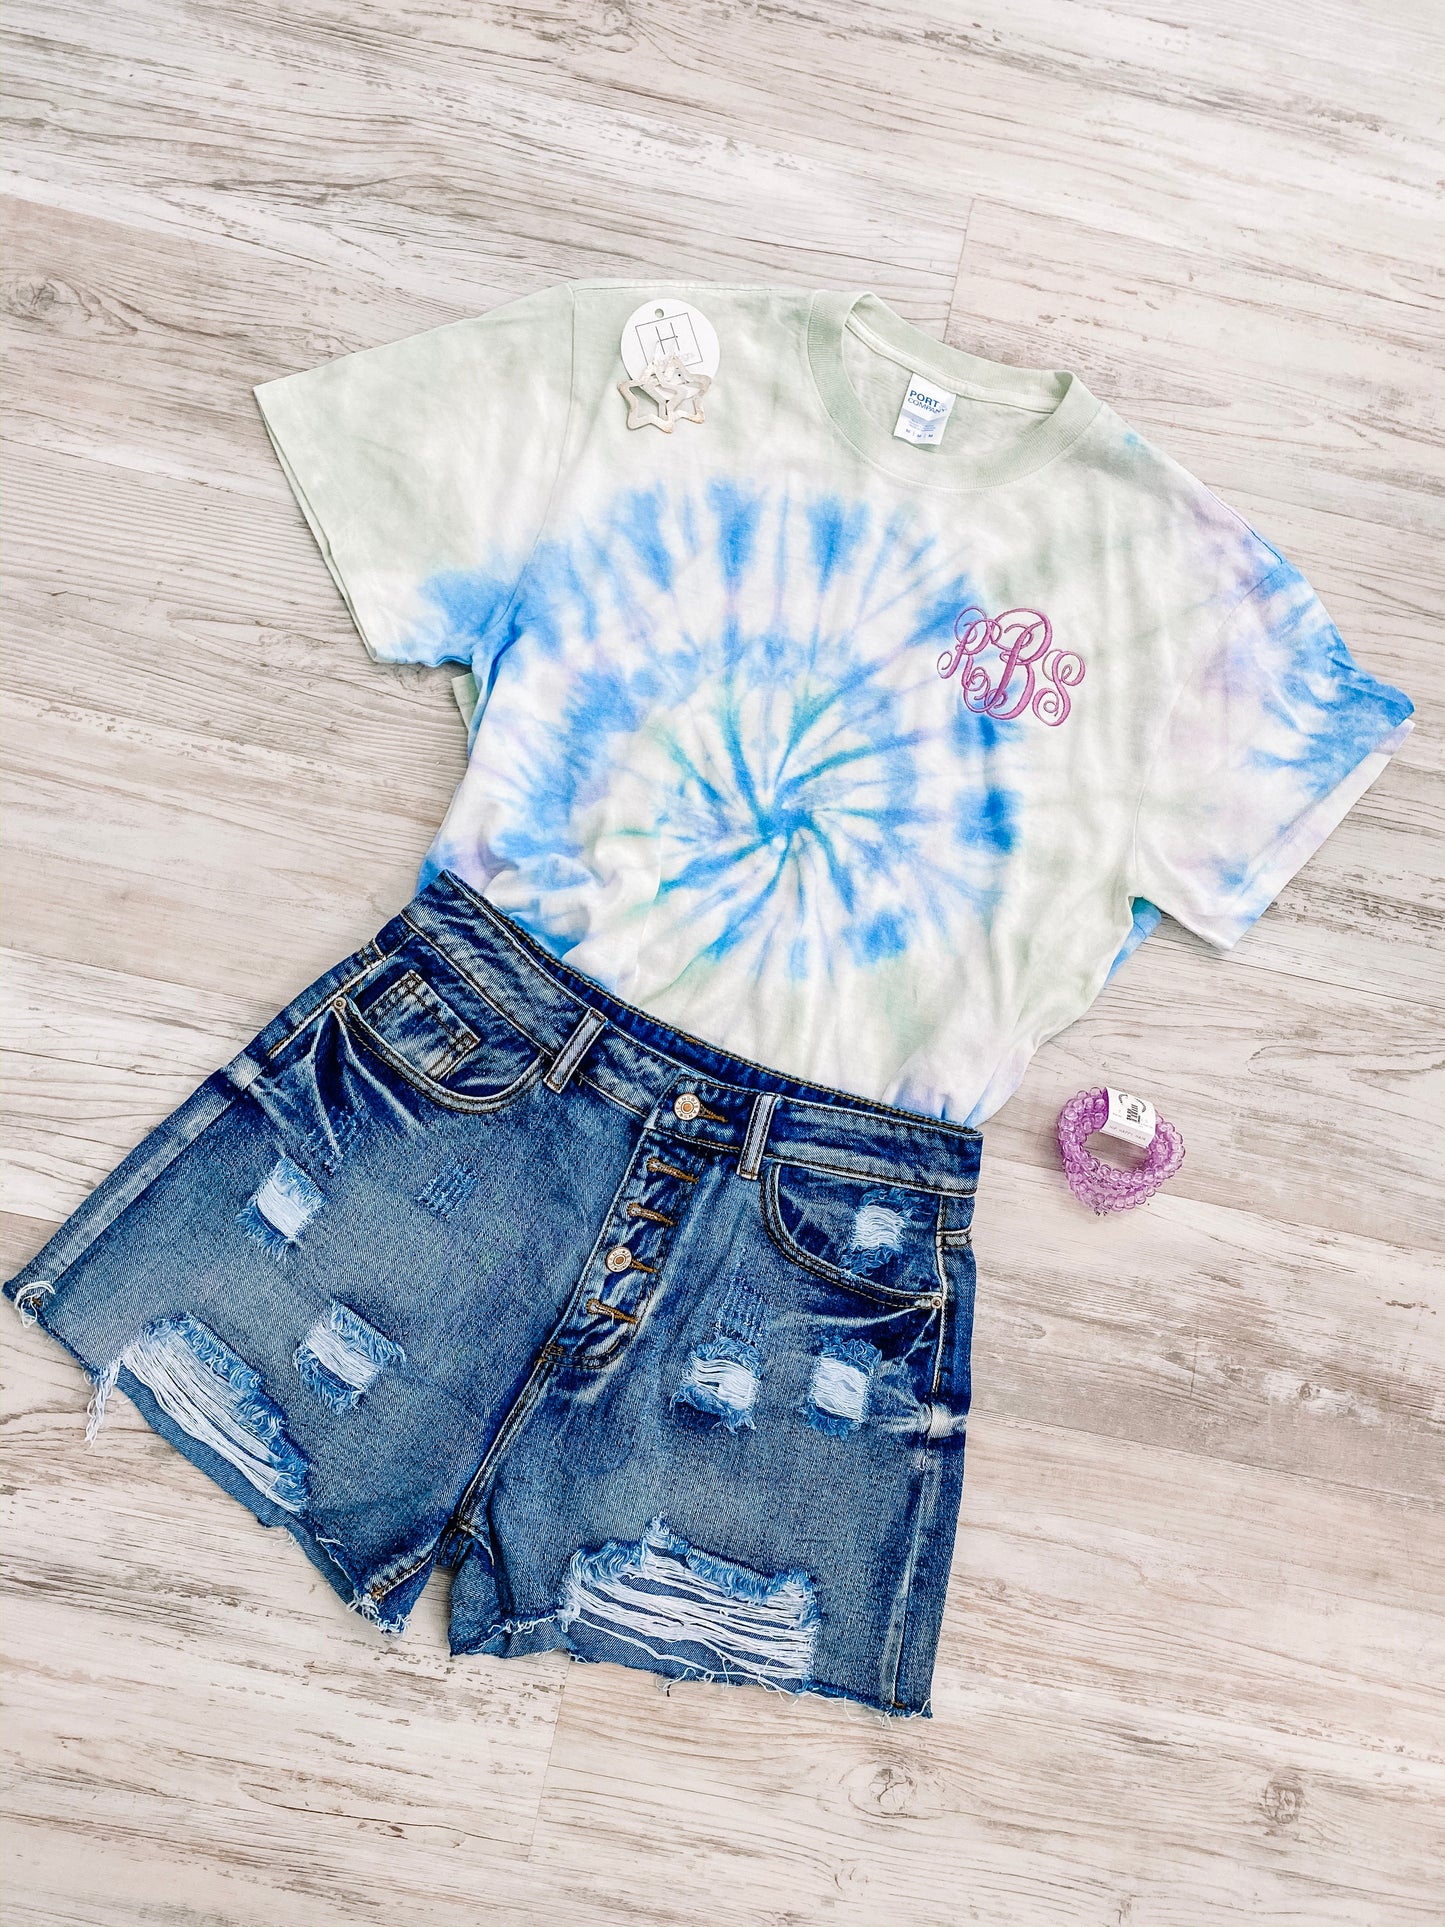 Monogrammed Tie Dye Tee - Watercolor Spiral - Southern Grace Creations